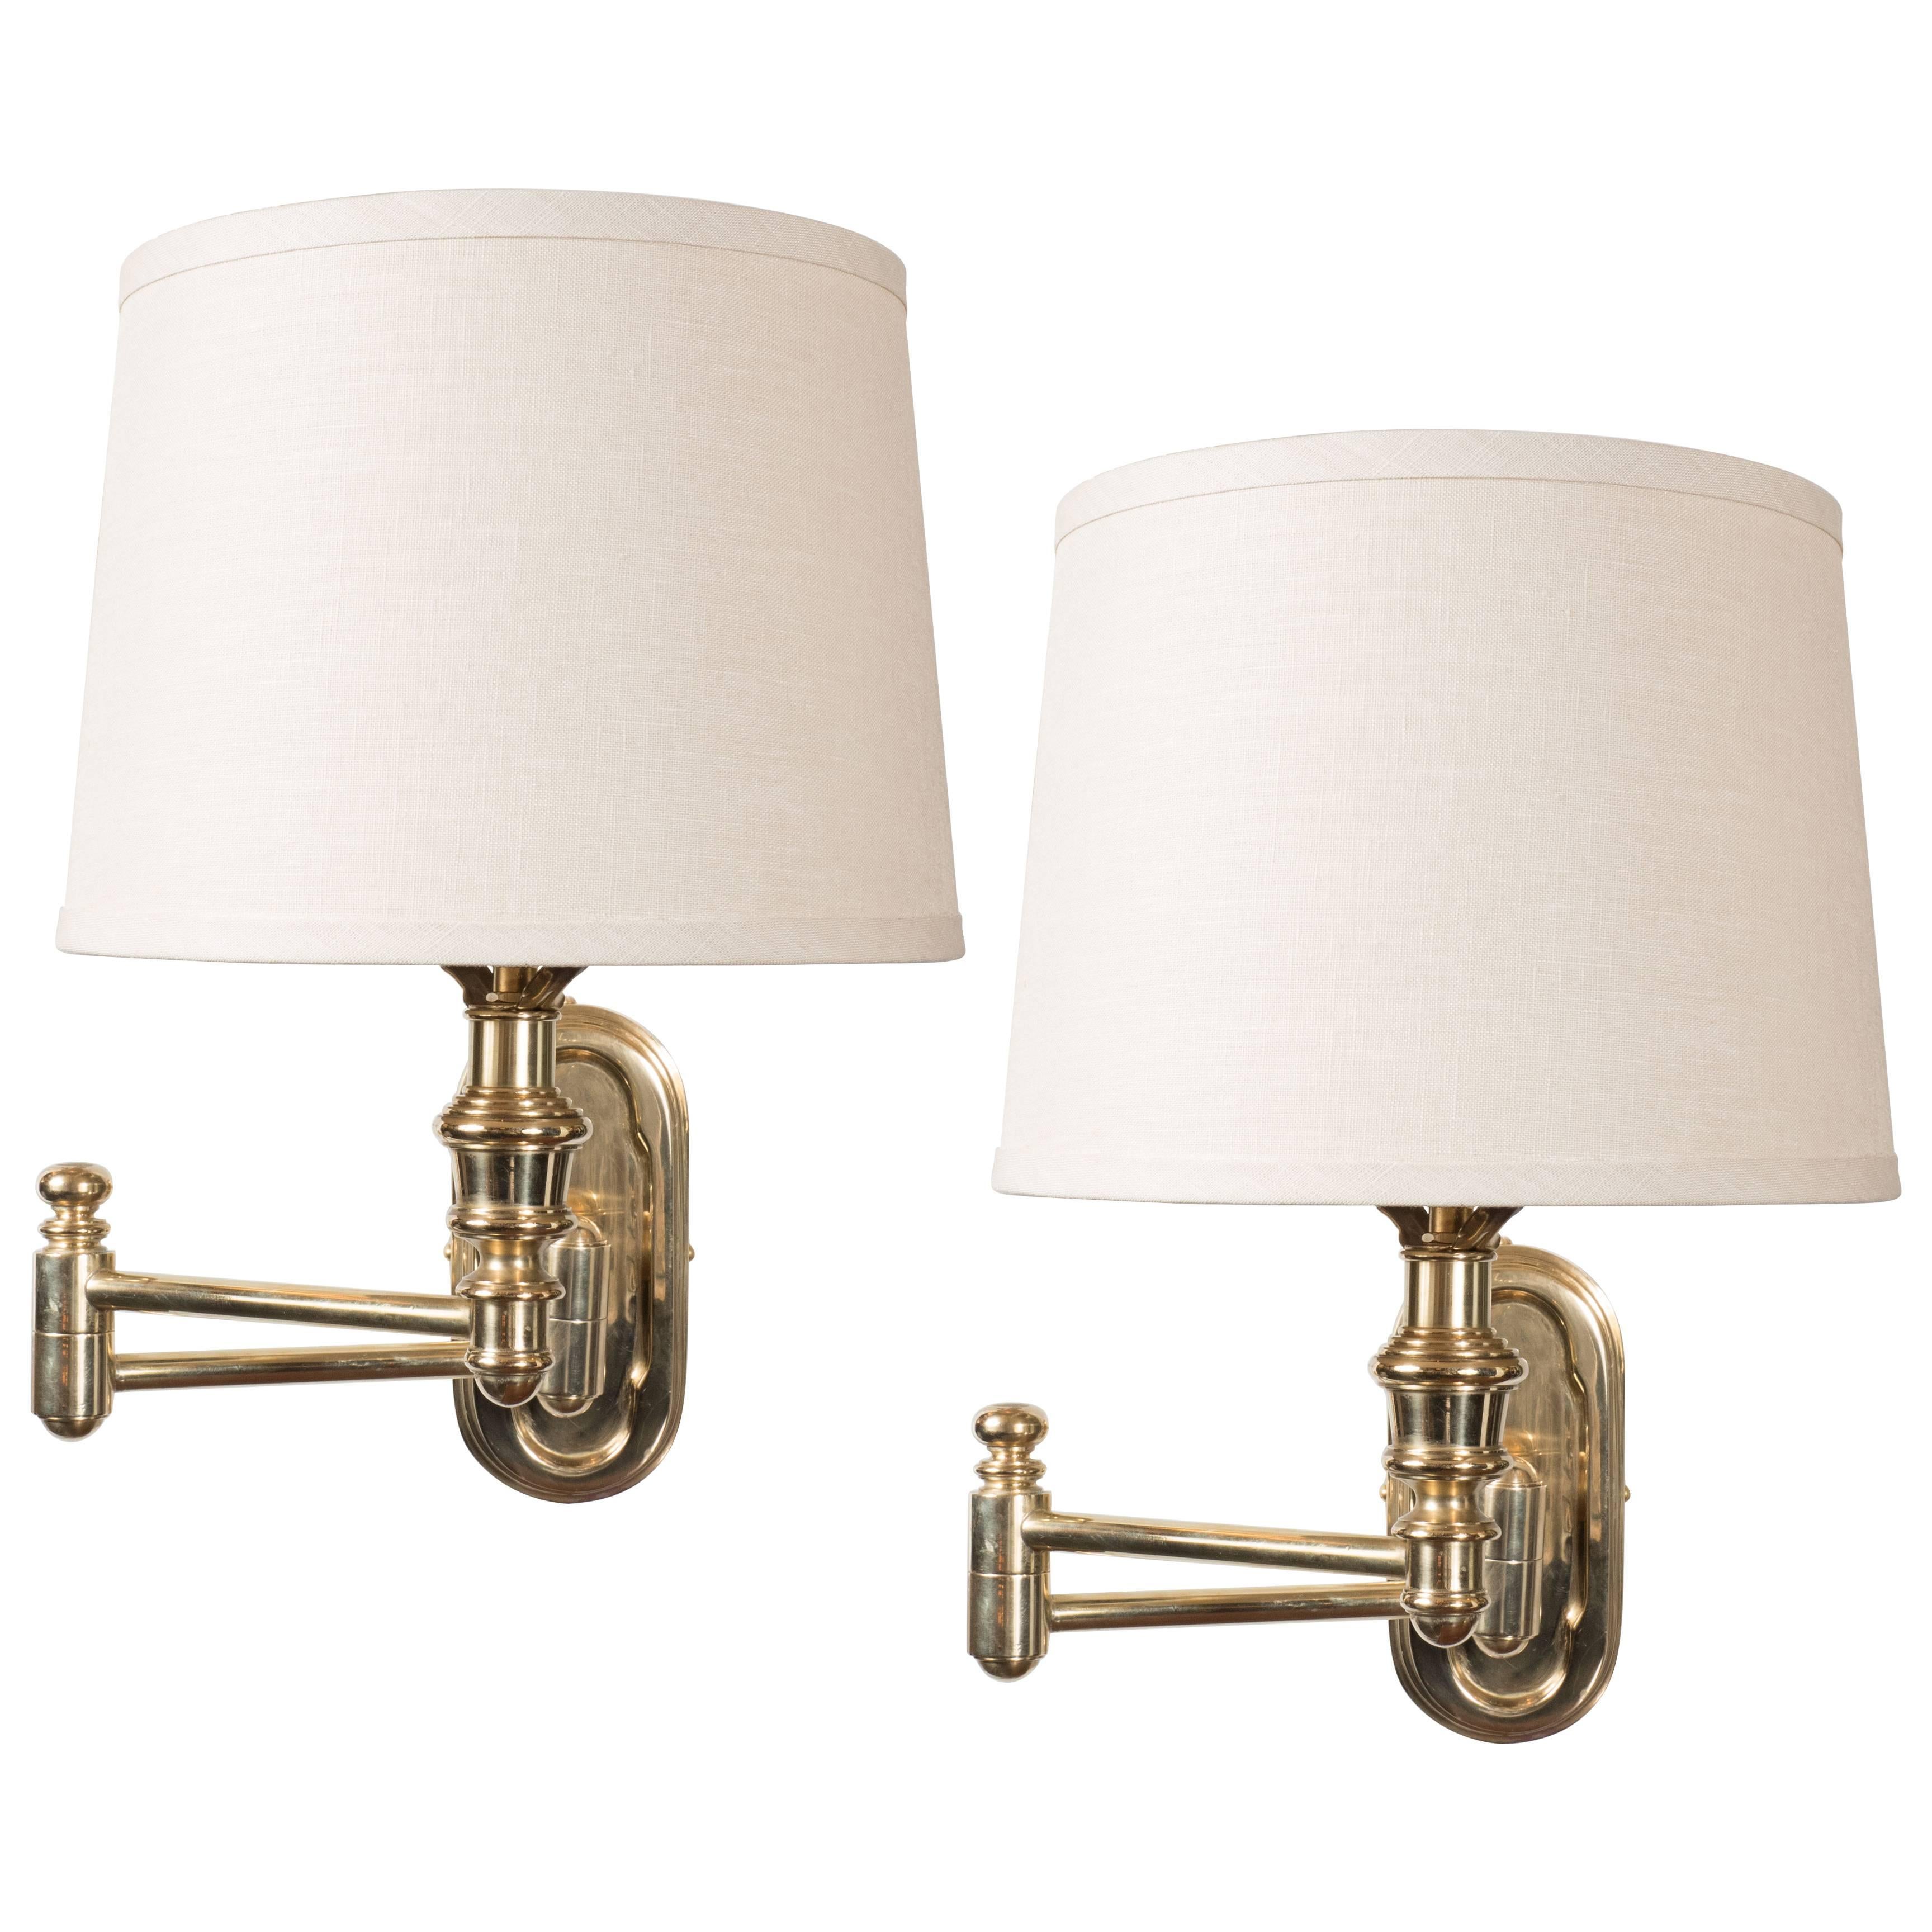 Pair of Mid-Century Swing Arm Brass Sconces with Custom Shades